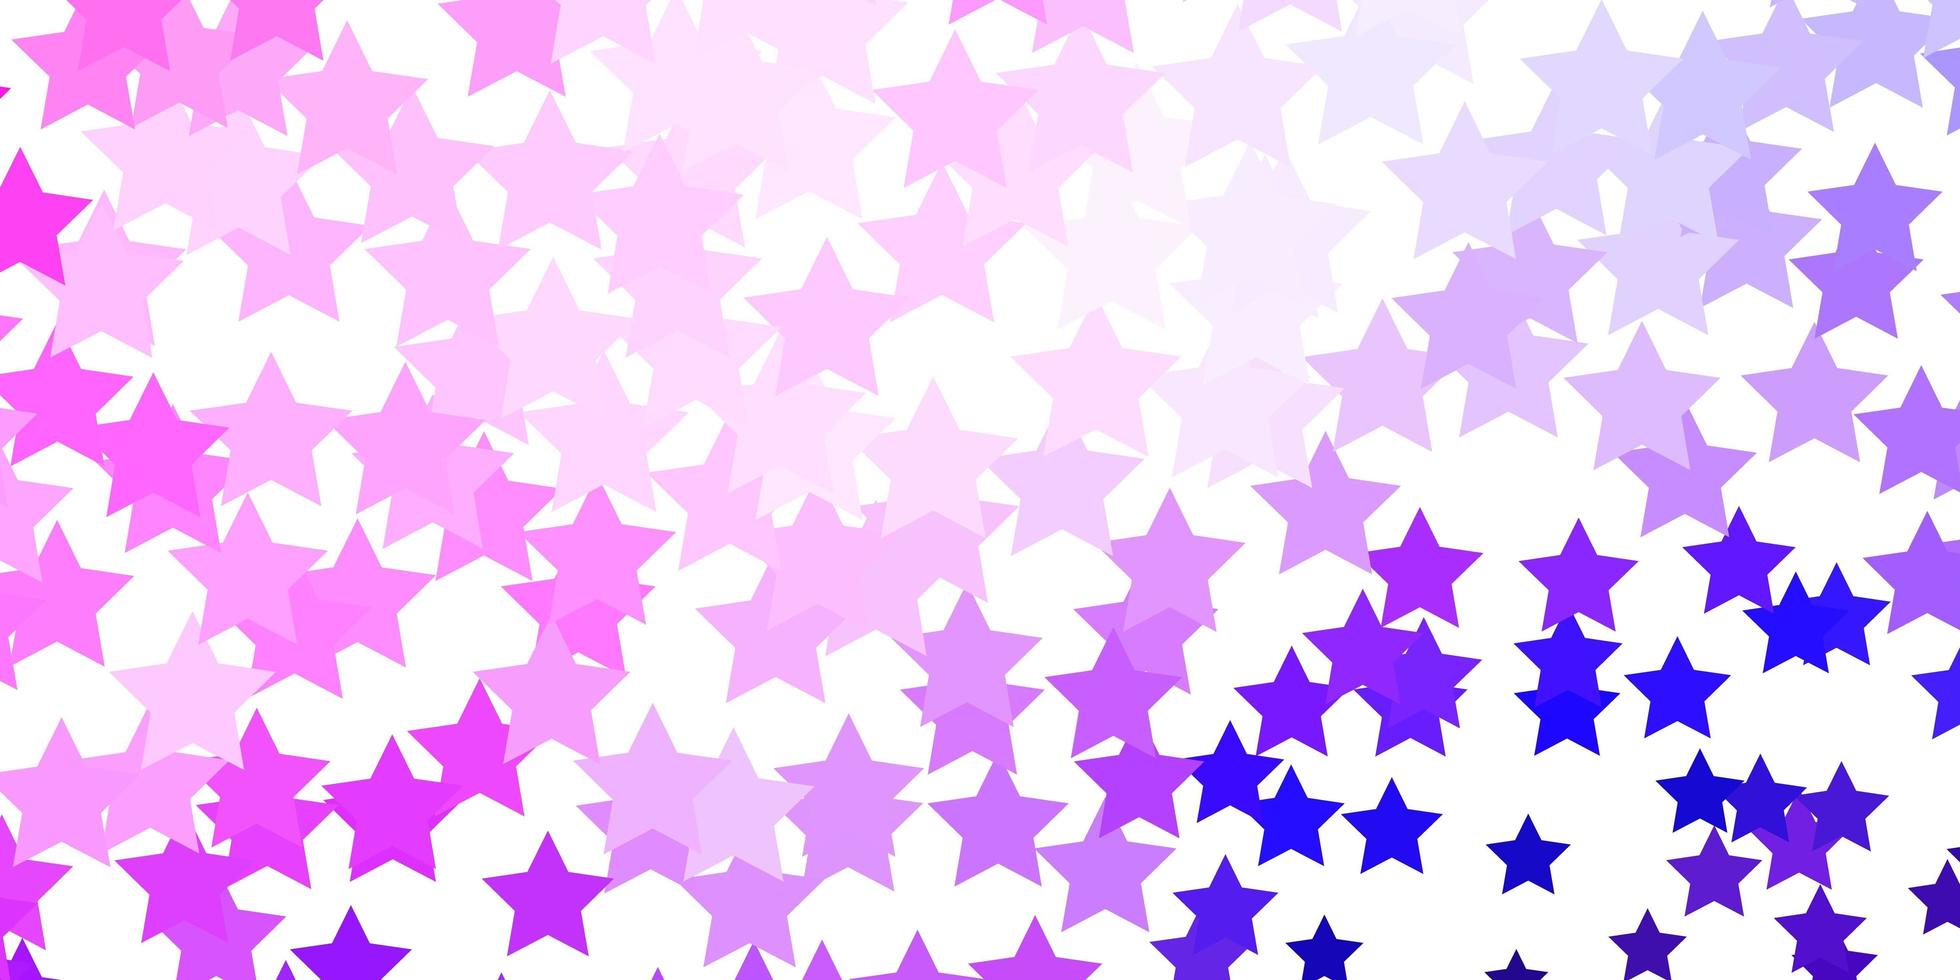 Light Purple, Pink vector background with small and big stars.